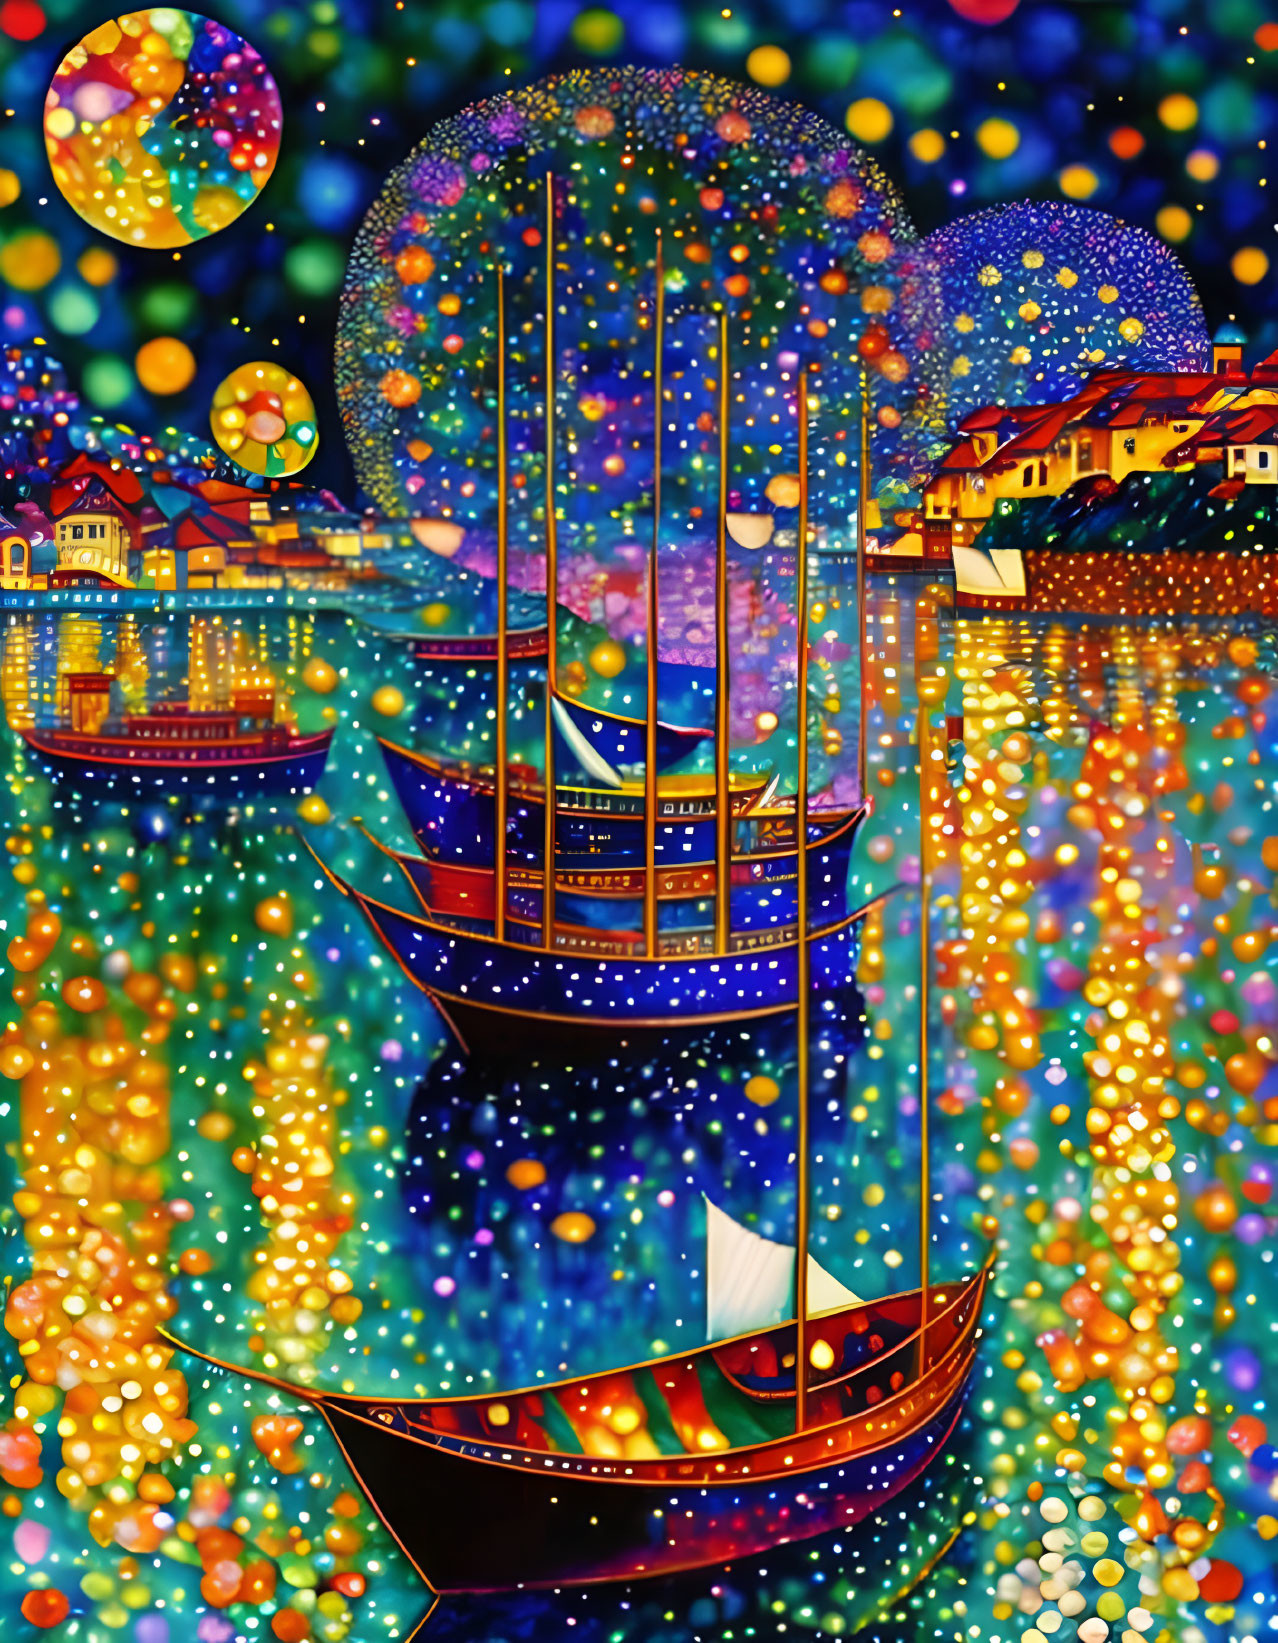 Colorful Sailboat Painting on Sparkling Water with Starry Sky & Village Shoreline